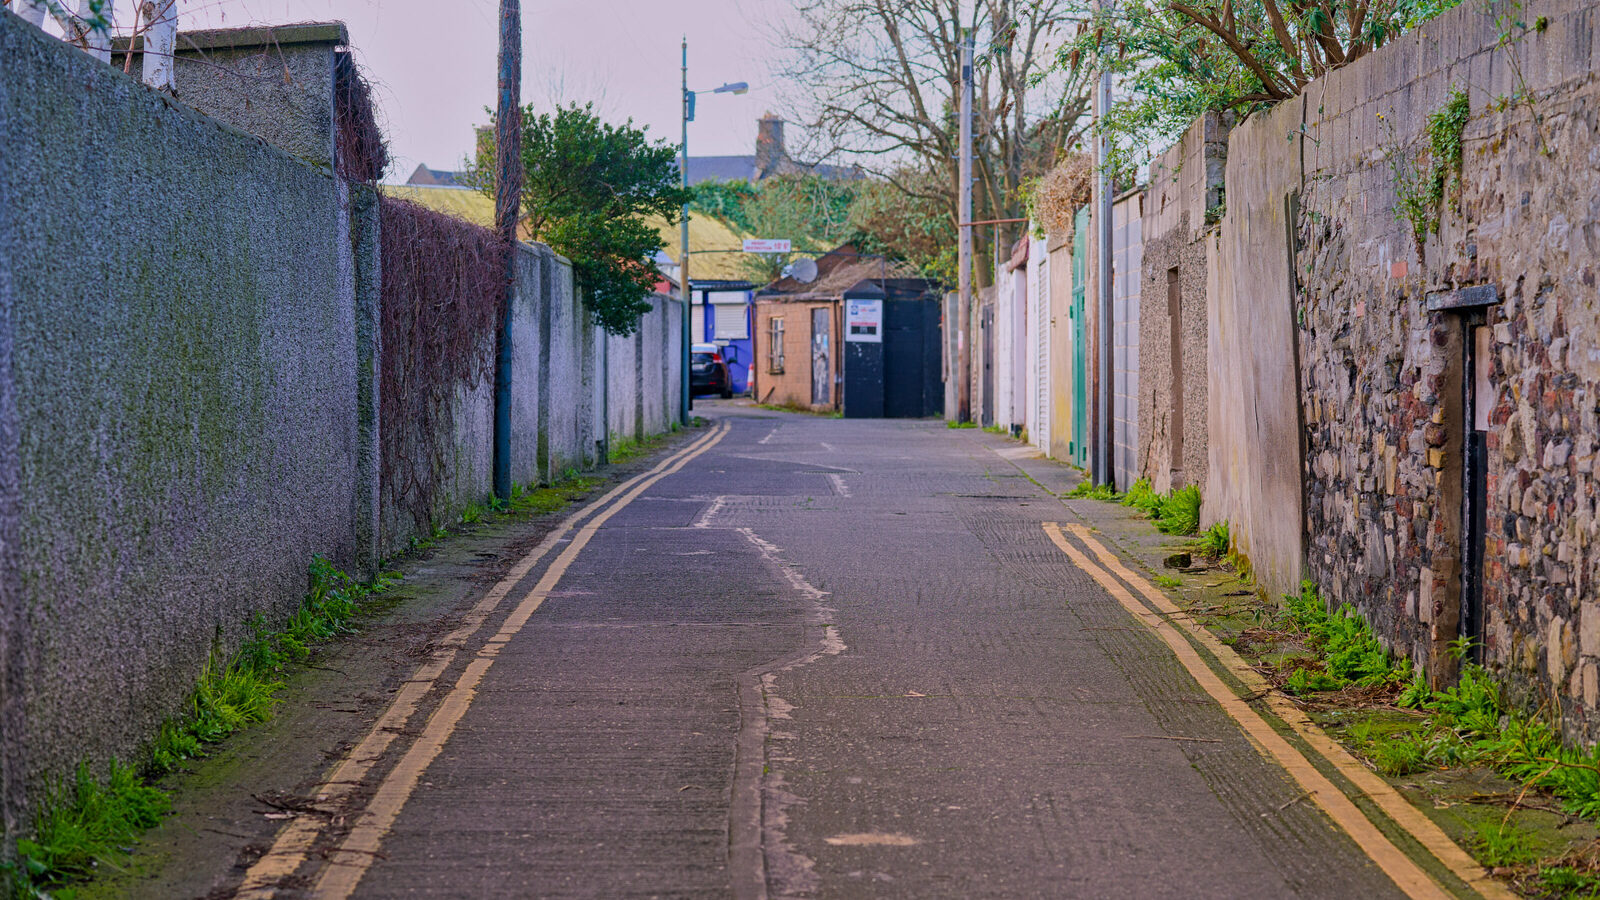 EXPLORING AUGHRIM STREET IN THE STONEYBATTER AREA OF DUBLIN [AND AUGHRIM LANE]-228636-1